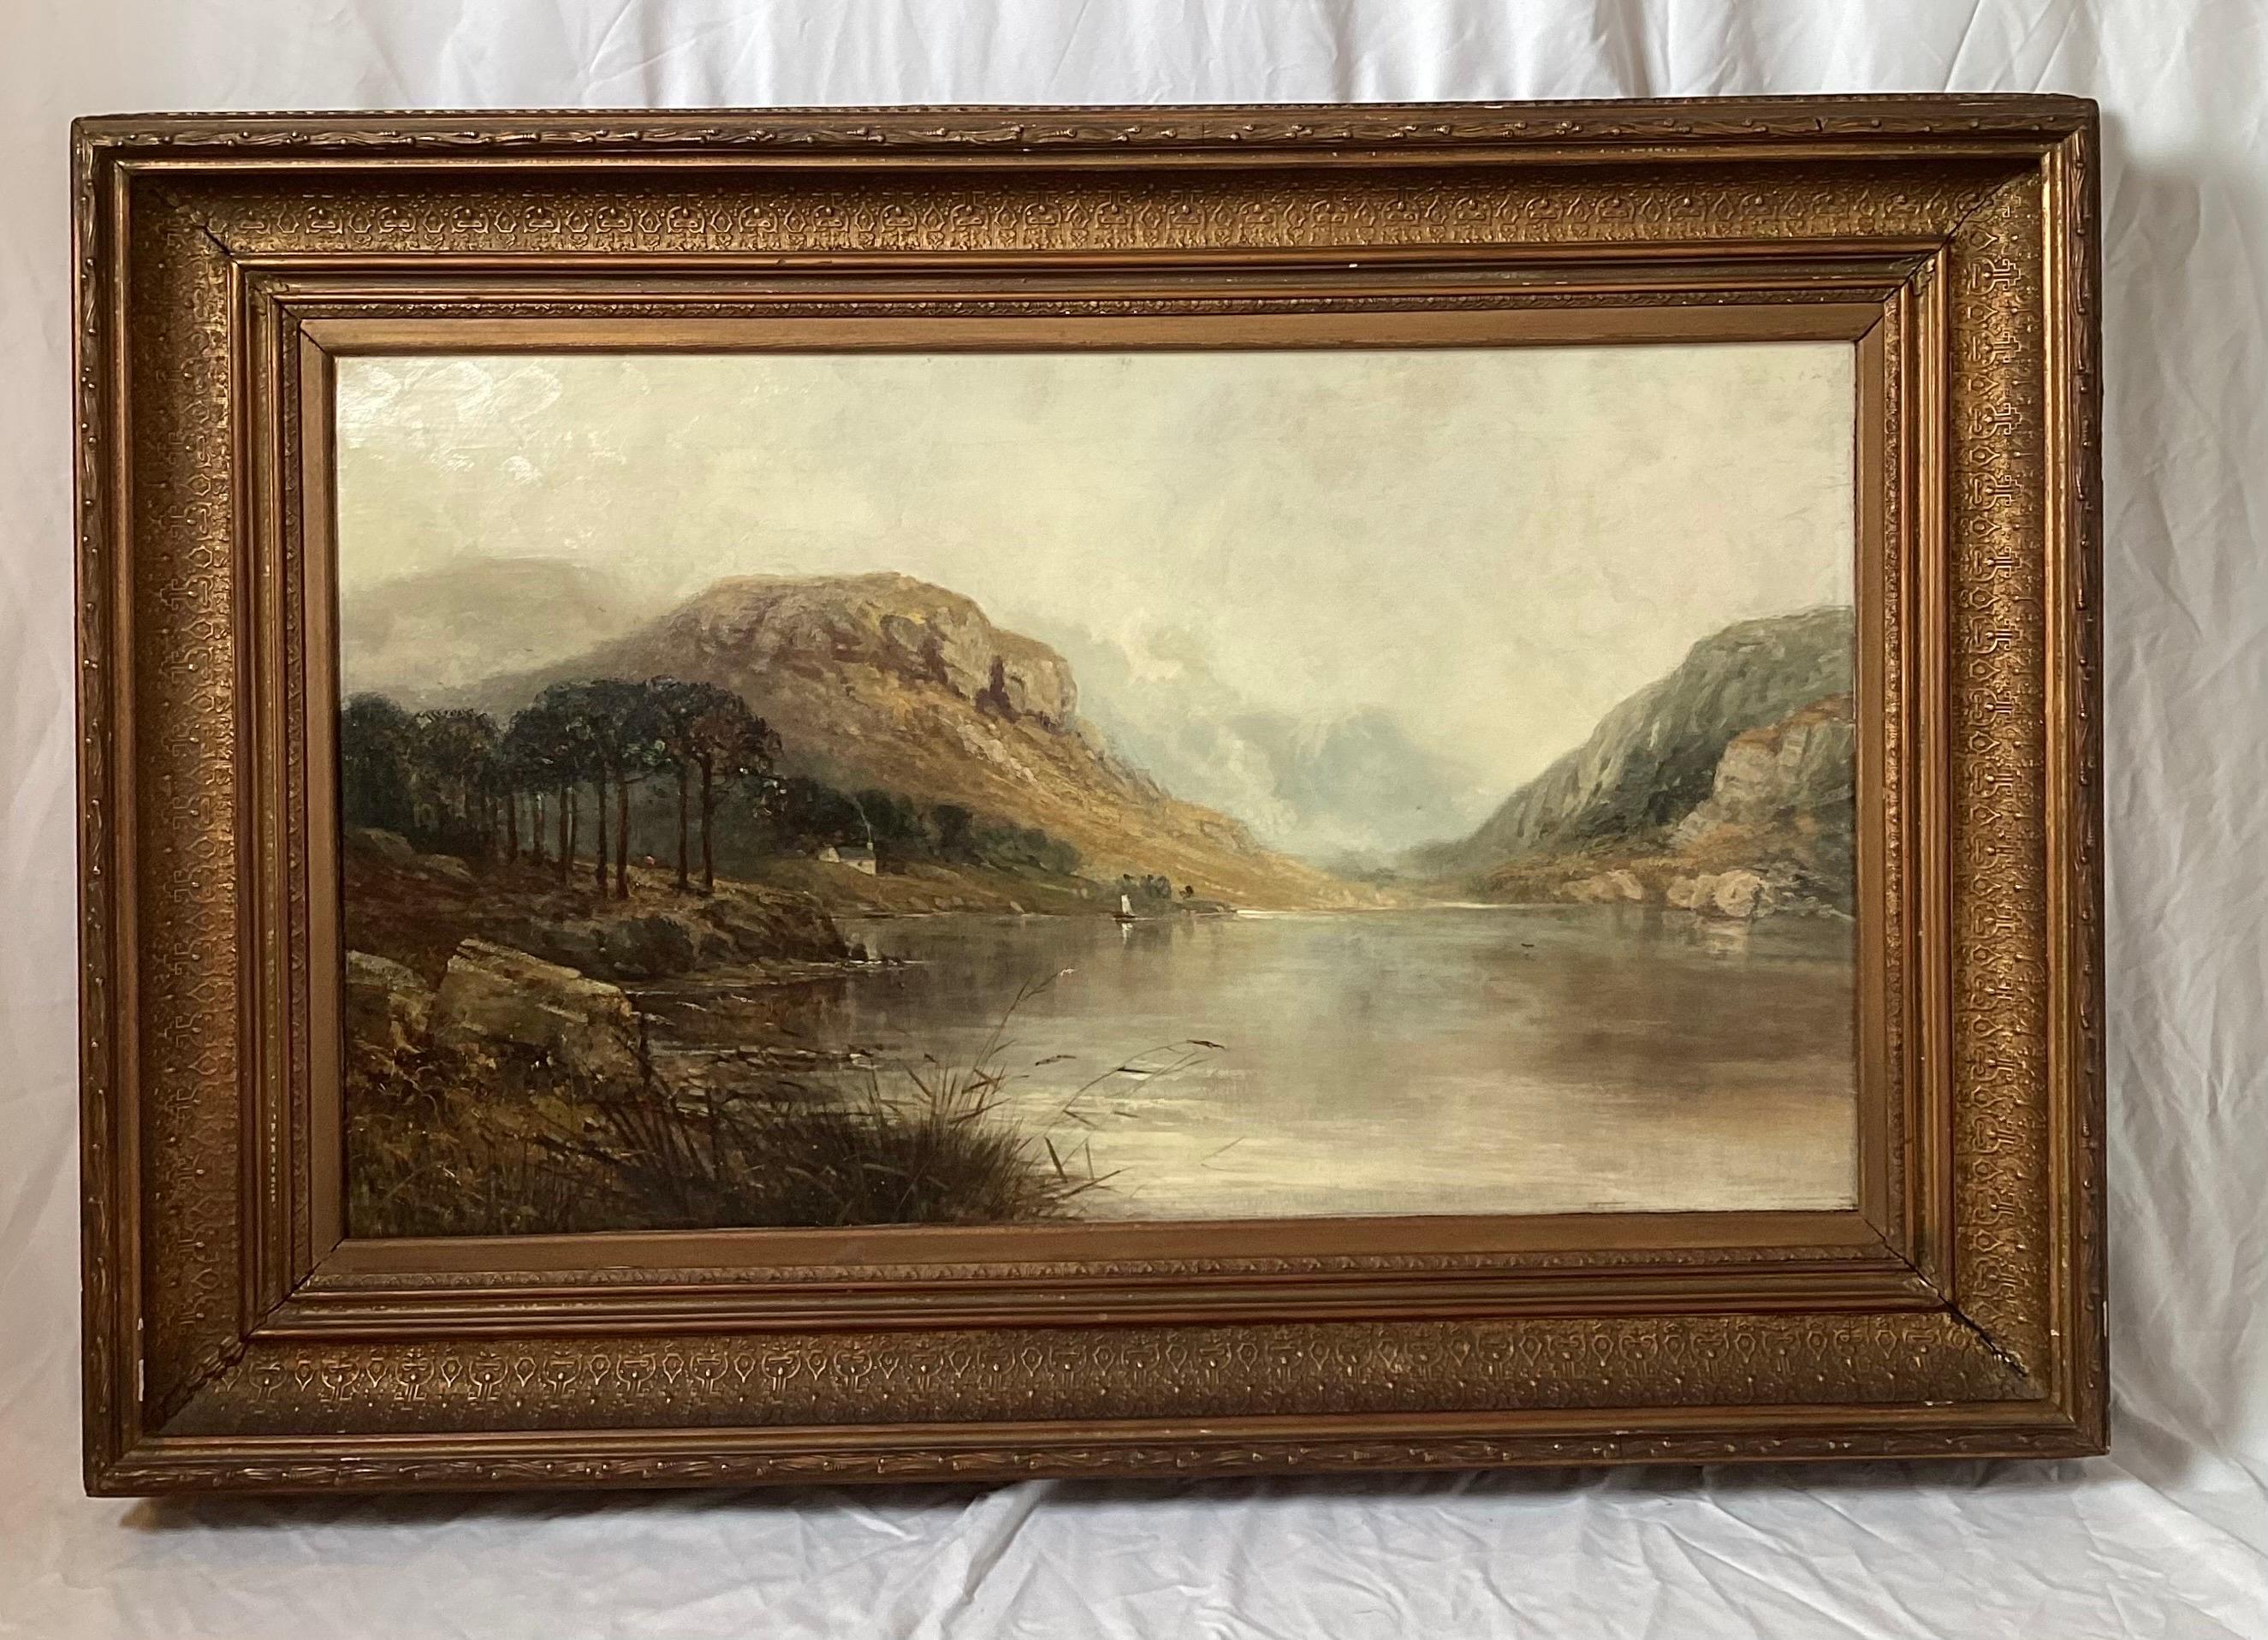 A large and beautifully painted English landscape oil on canvas in original giltwood frame, artist signed Arthur Wellesley Cotrell on lover left. Well cared for original condition with patination to the frame and some minor chipping. 44.5 wide, 30.5